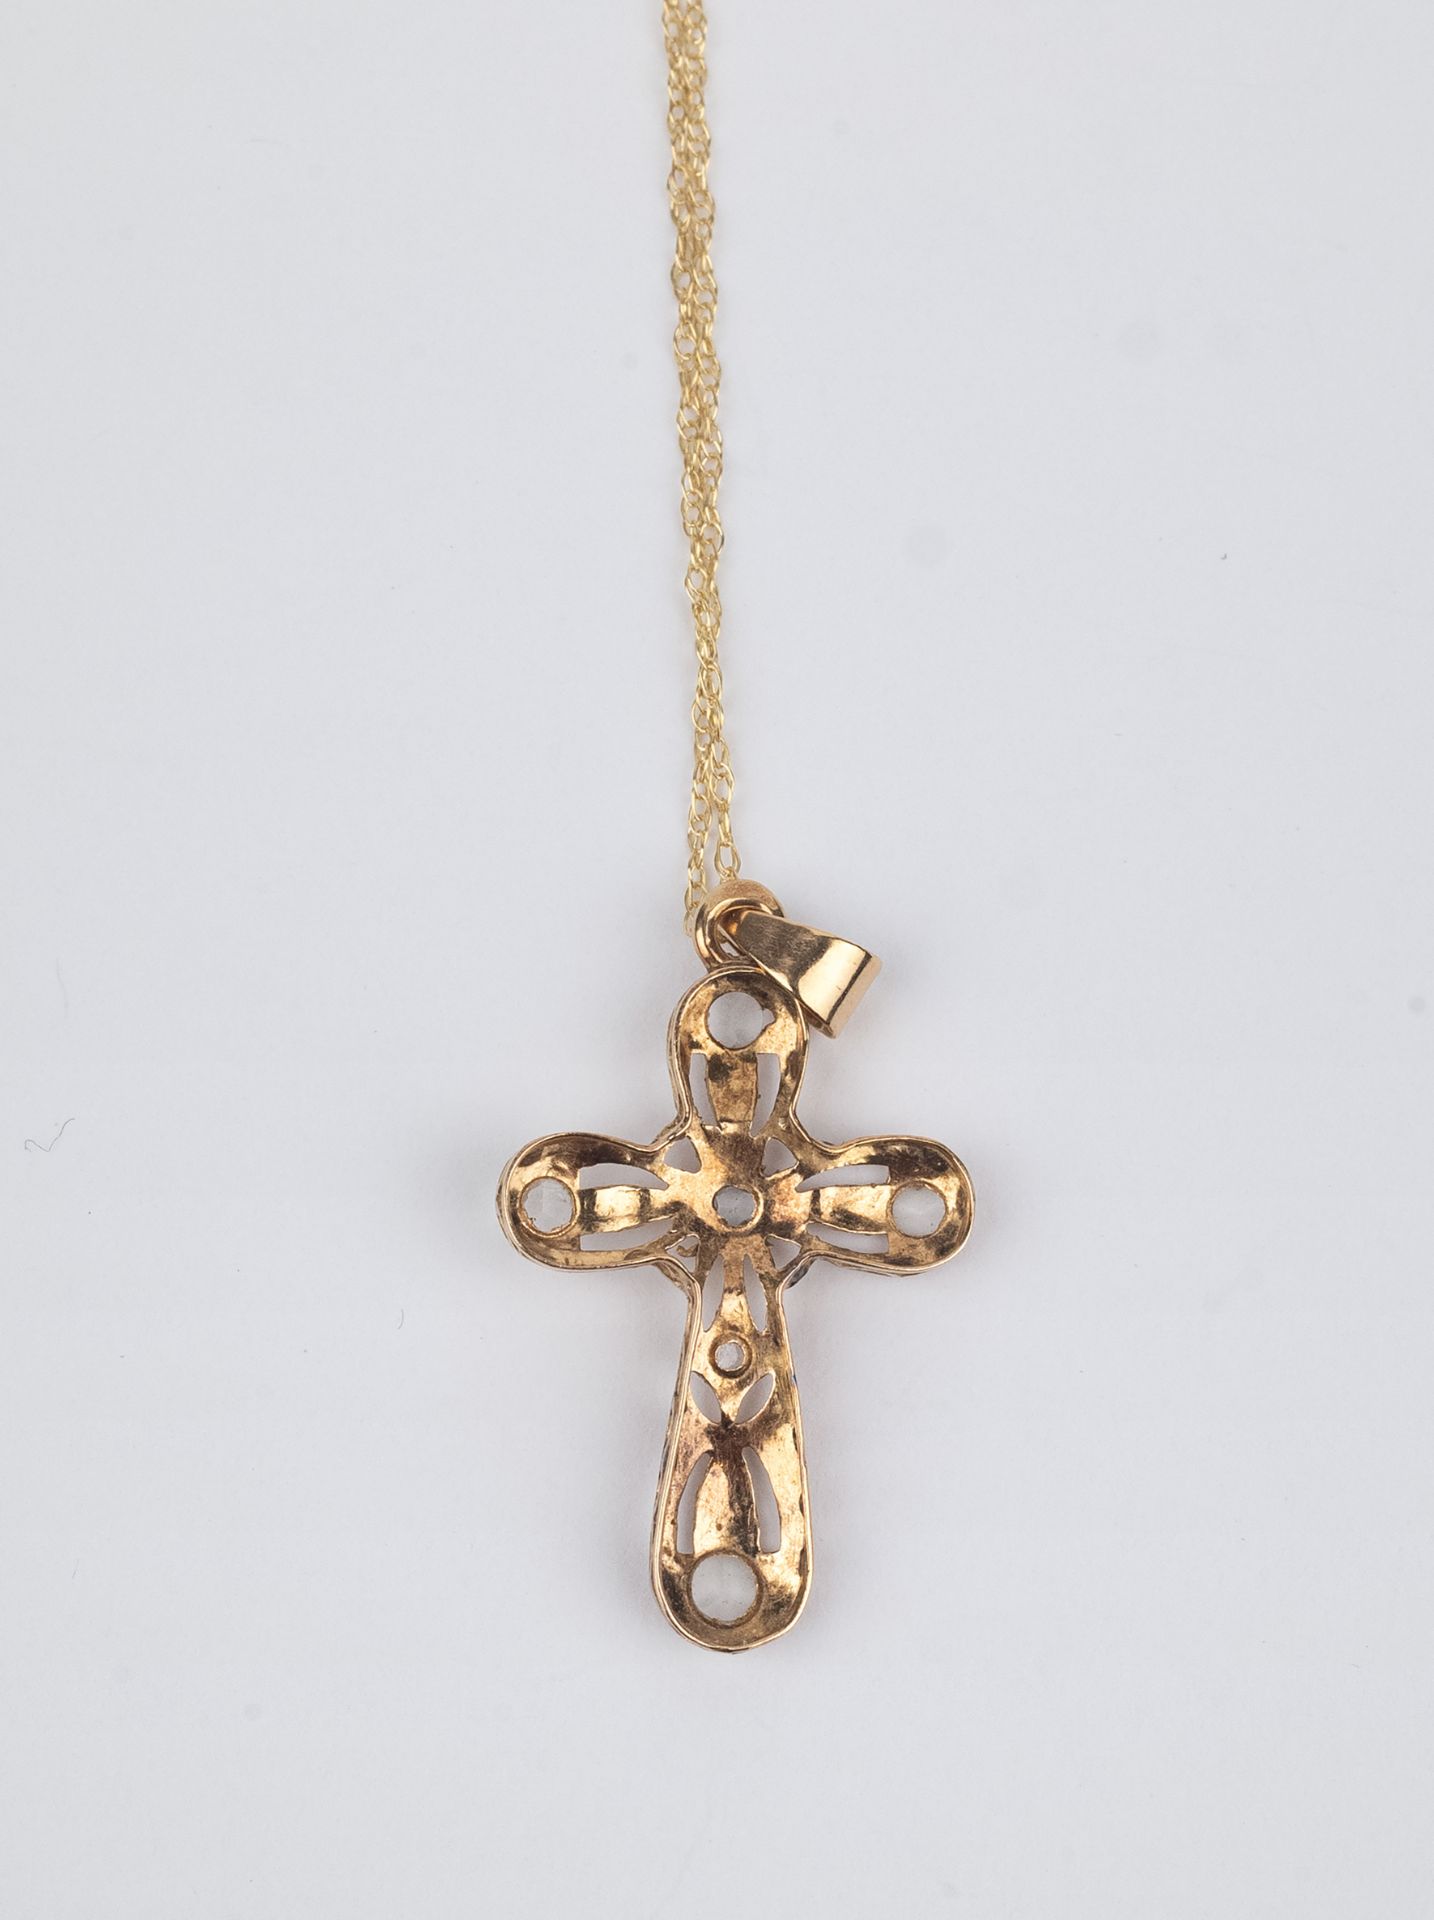 A frist half of 20th century 14k. gold and sapphires pendant cross and chain - Image 3 of 3